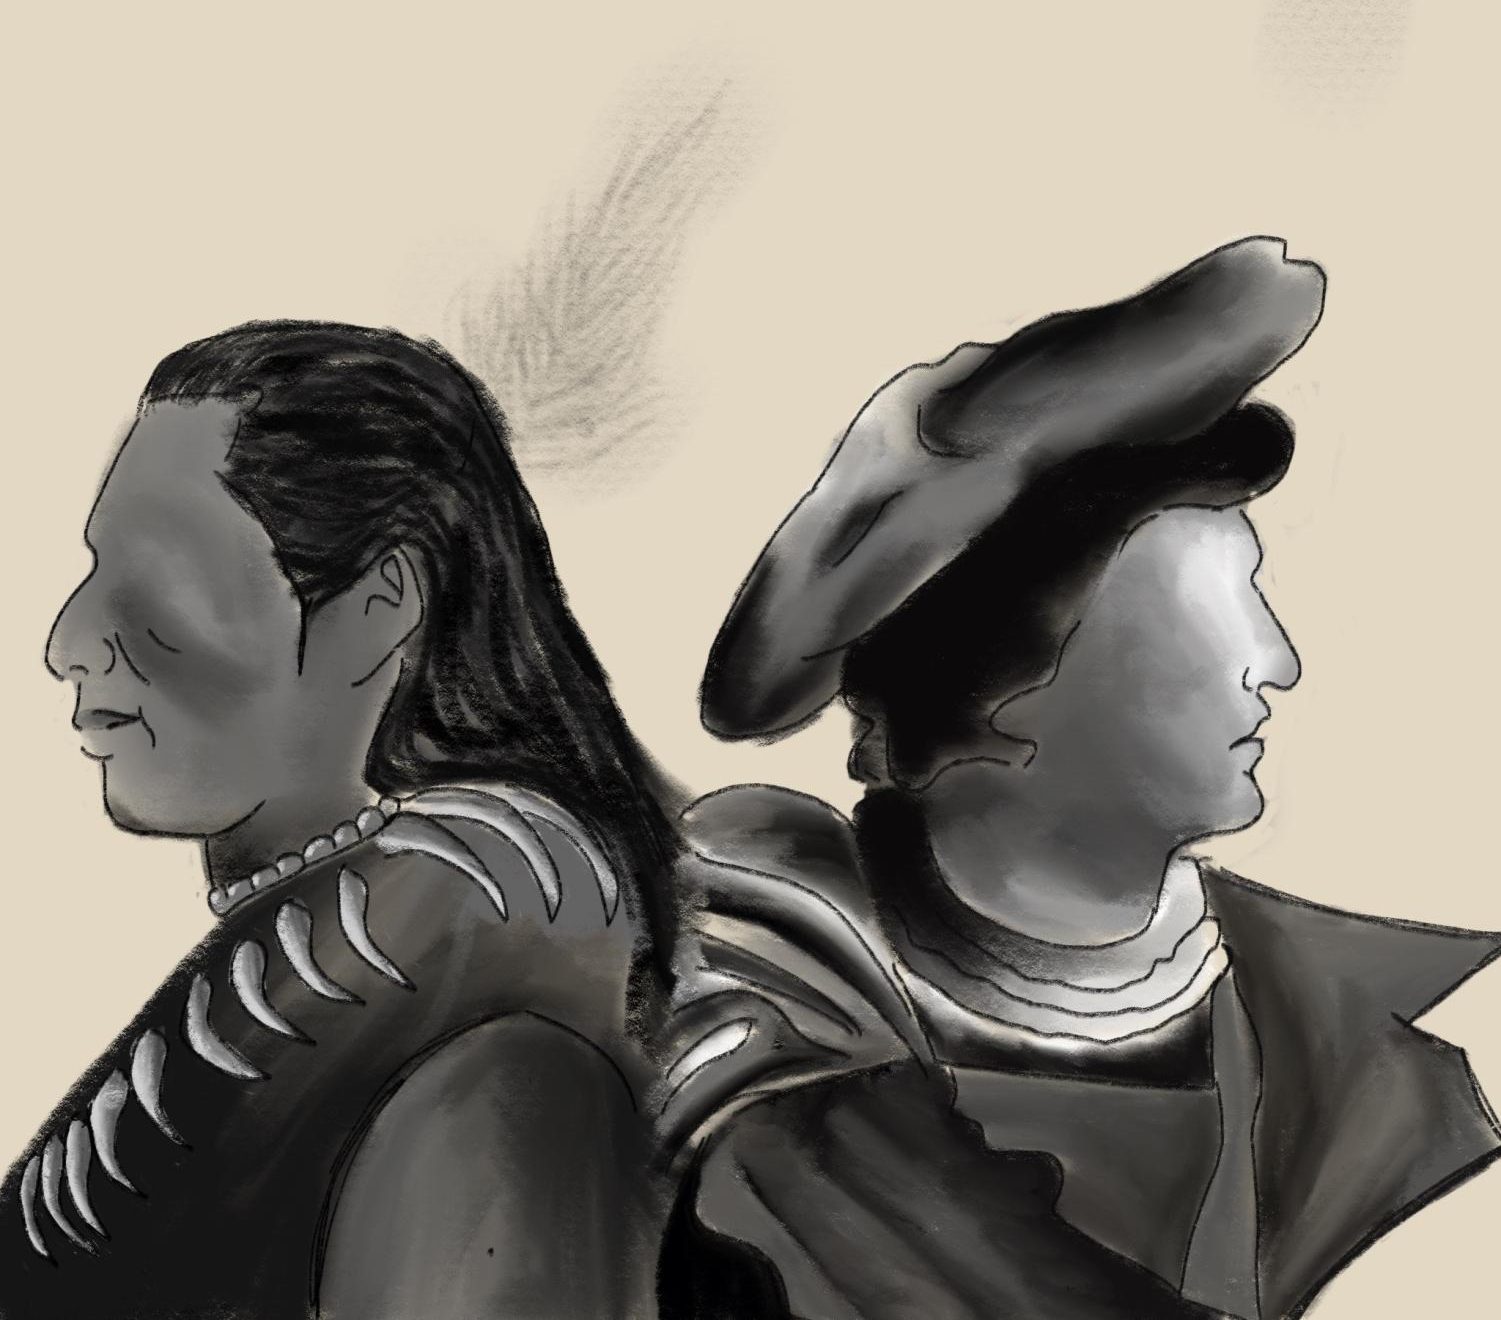 METEA MEDIA | The Columbus Day or Indigenous Peoples' Day debate perpetuates discussion just like its history